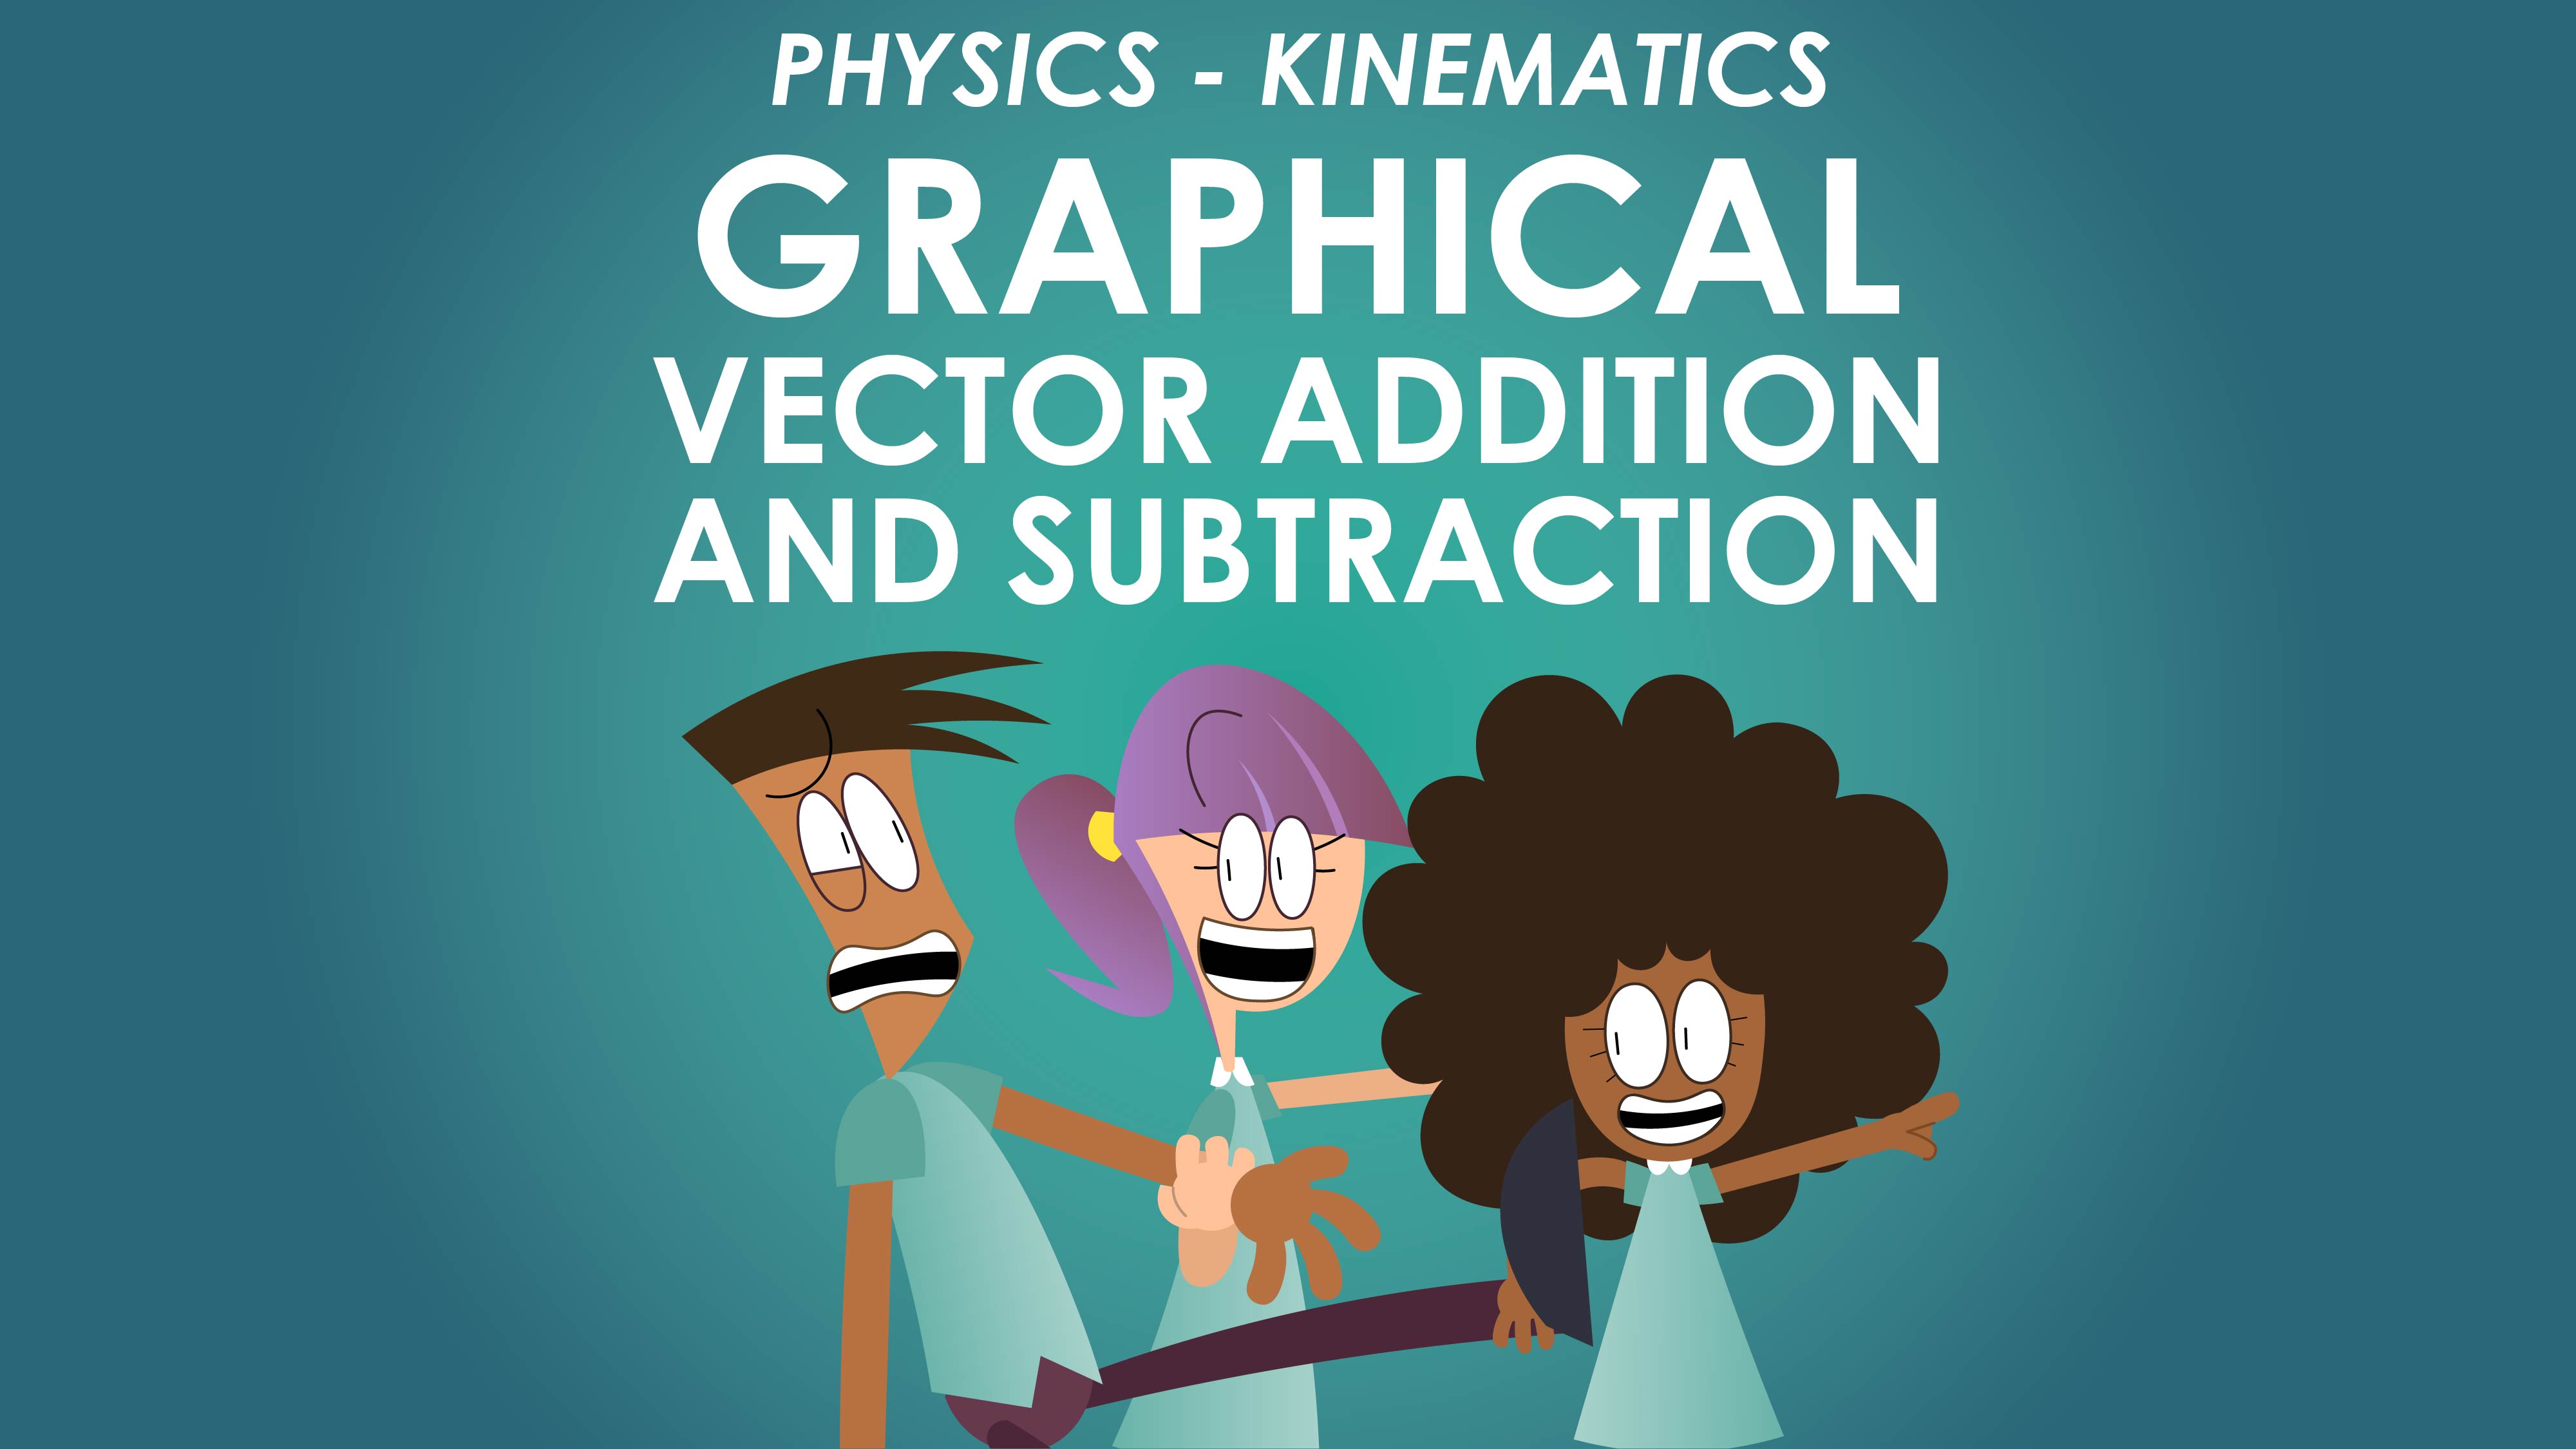 Graphical Vector Addition & Subtraction - Motion in a Straight Line